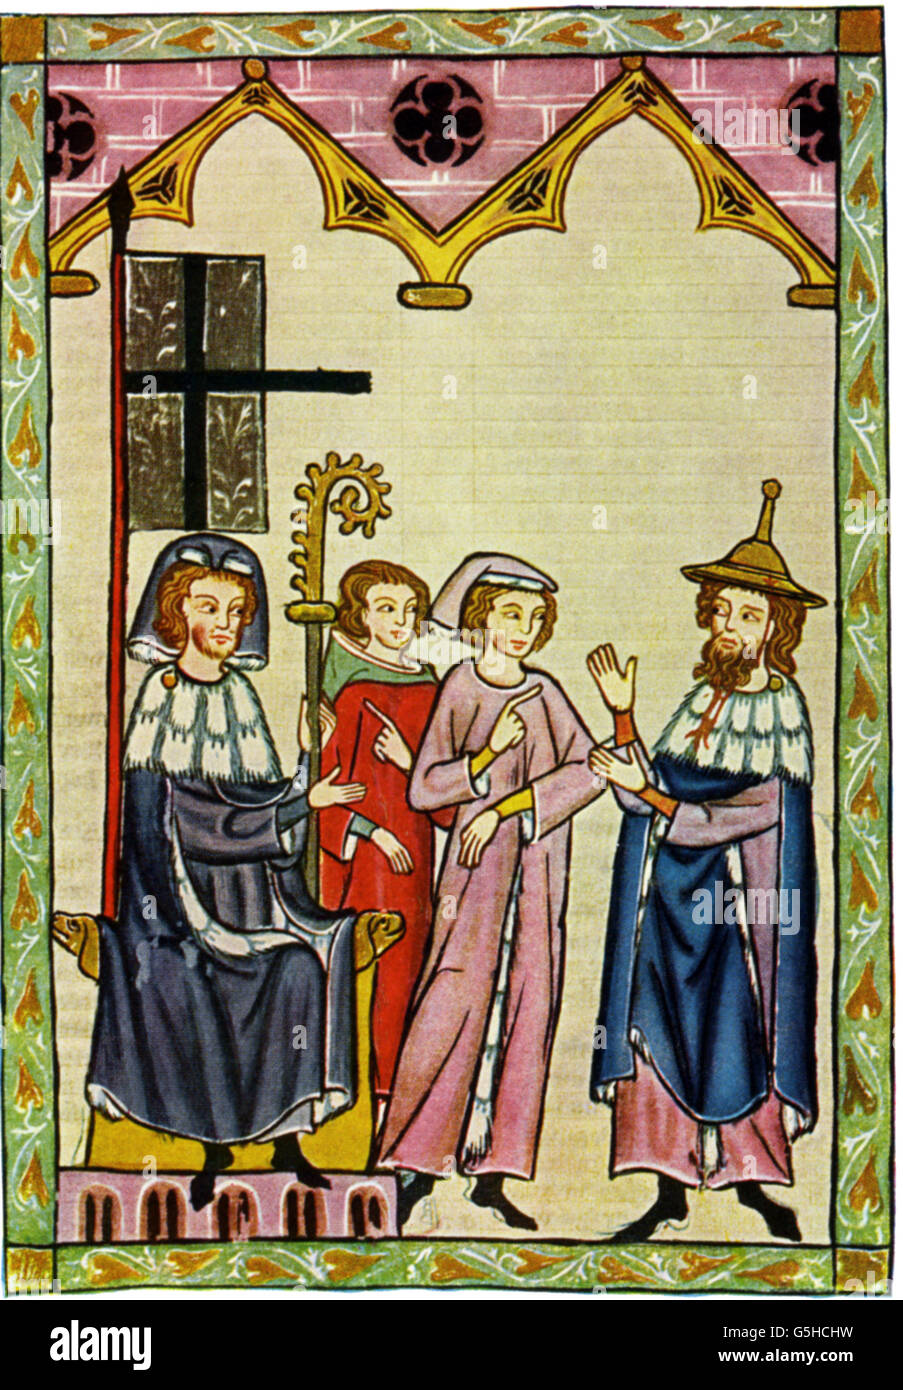 Suesskind von Trimberg, 13th century, Jewish poet, full length, is reciting to a bishop, miniature out of the Great Heidelberg manuscript of ballads (Manesse), circa 1300, Stock Photo